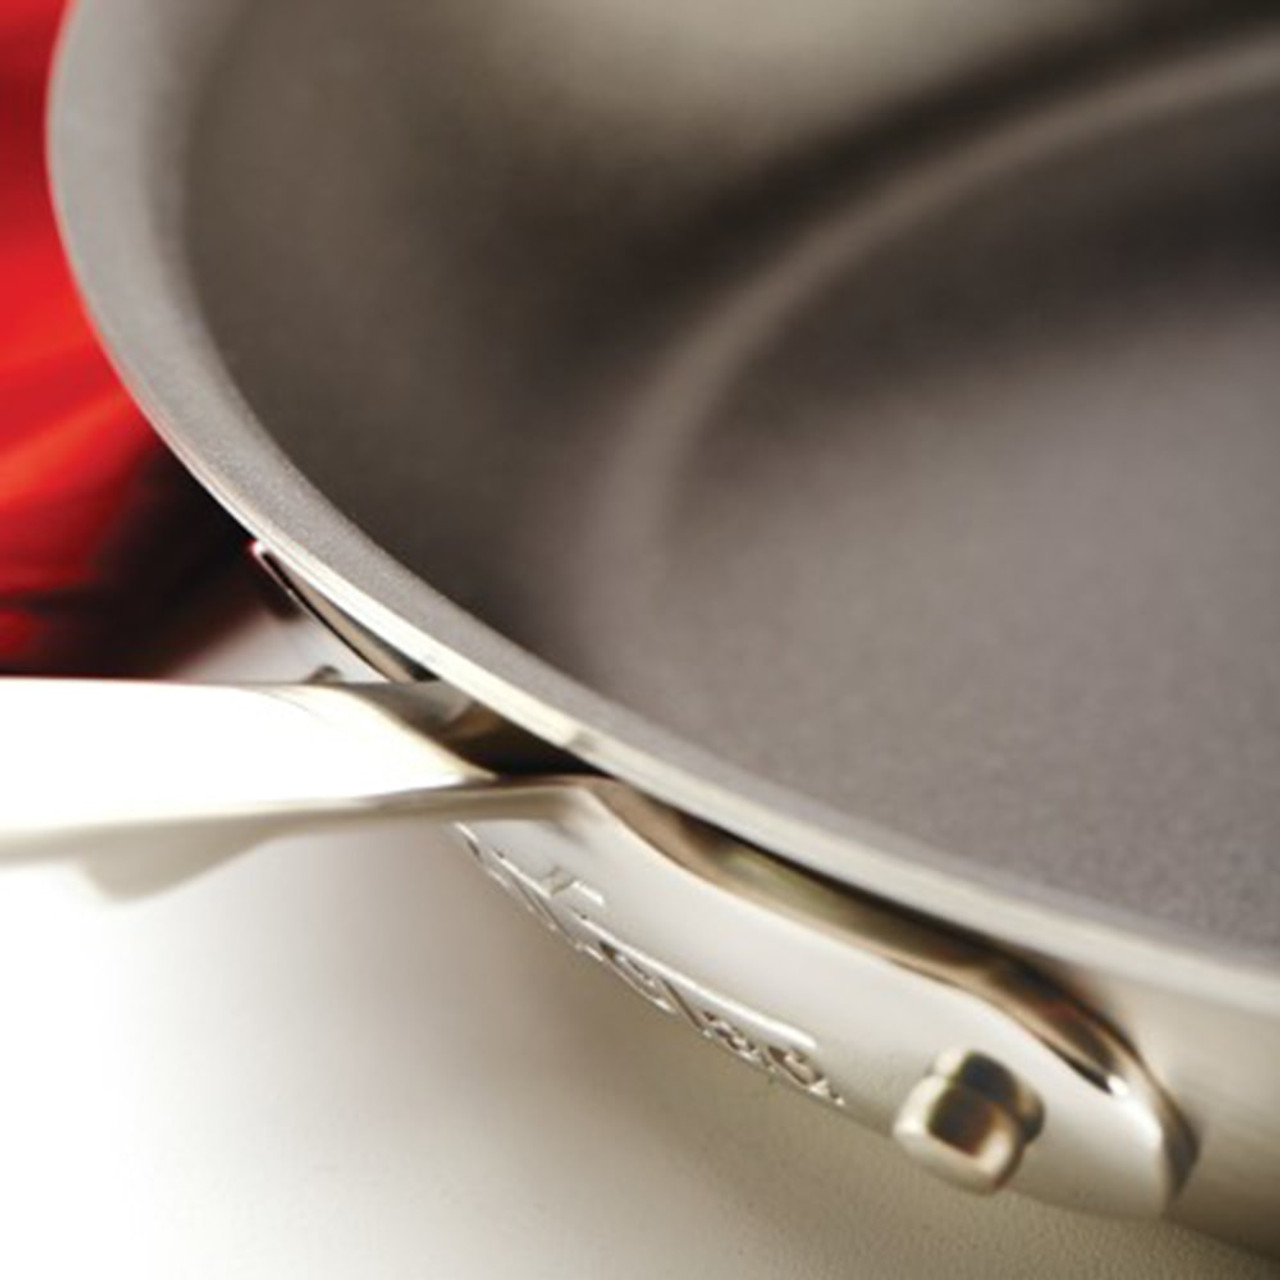 https://cdn11.bigcommerce.com/s-hccytny0od/images/stencil/1280x1280/products/477/1752/all-clad-d5-nonstick-fry-pan__04591.1592243225.jpg?c=2?imbypass=on